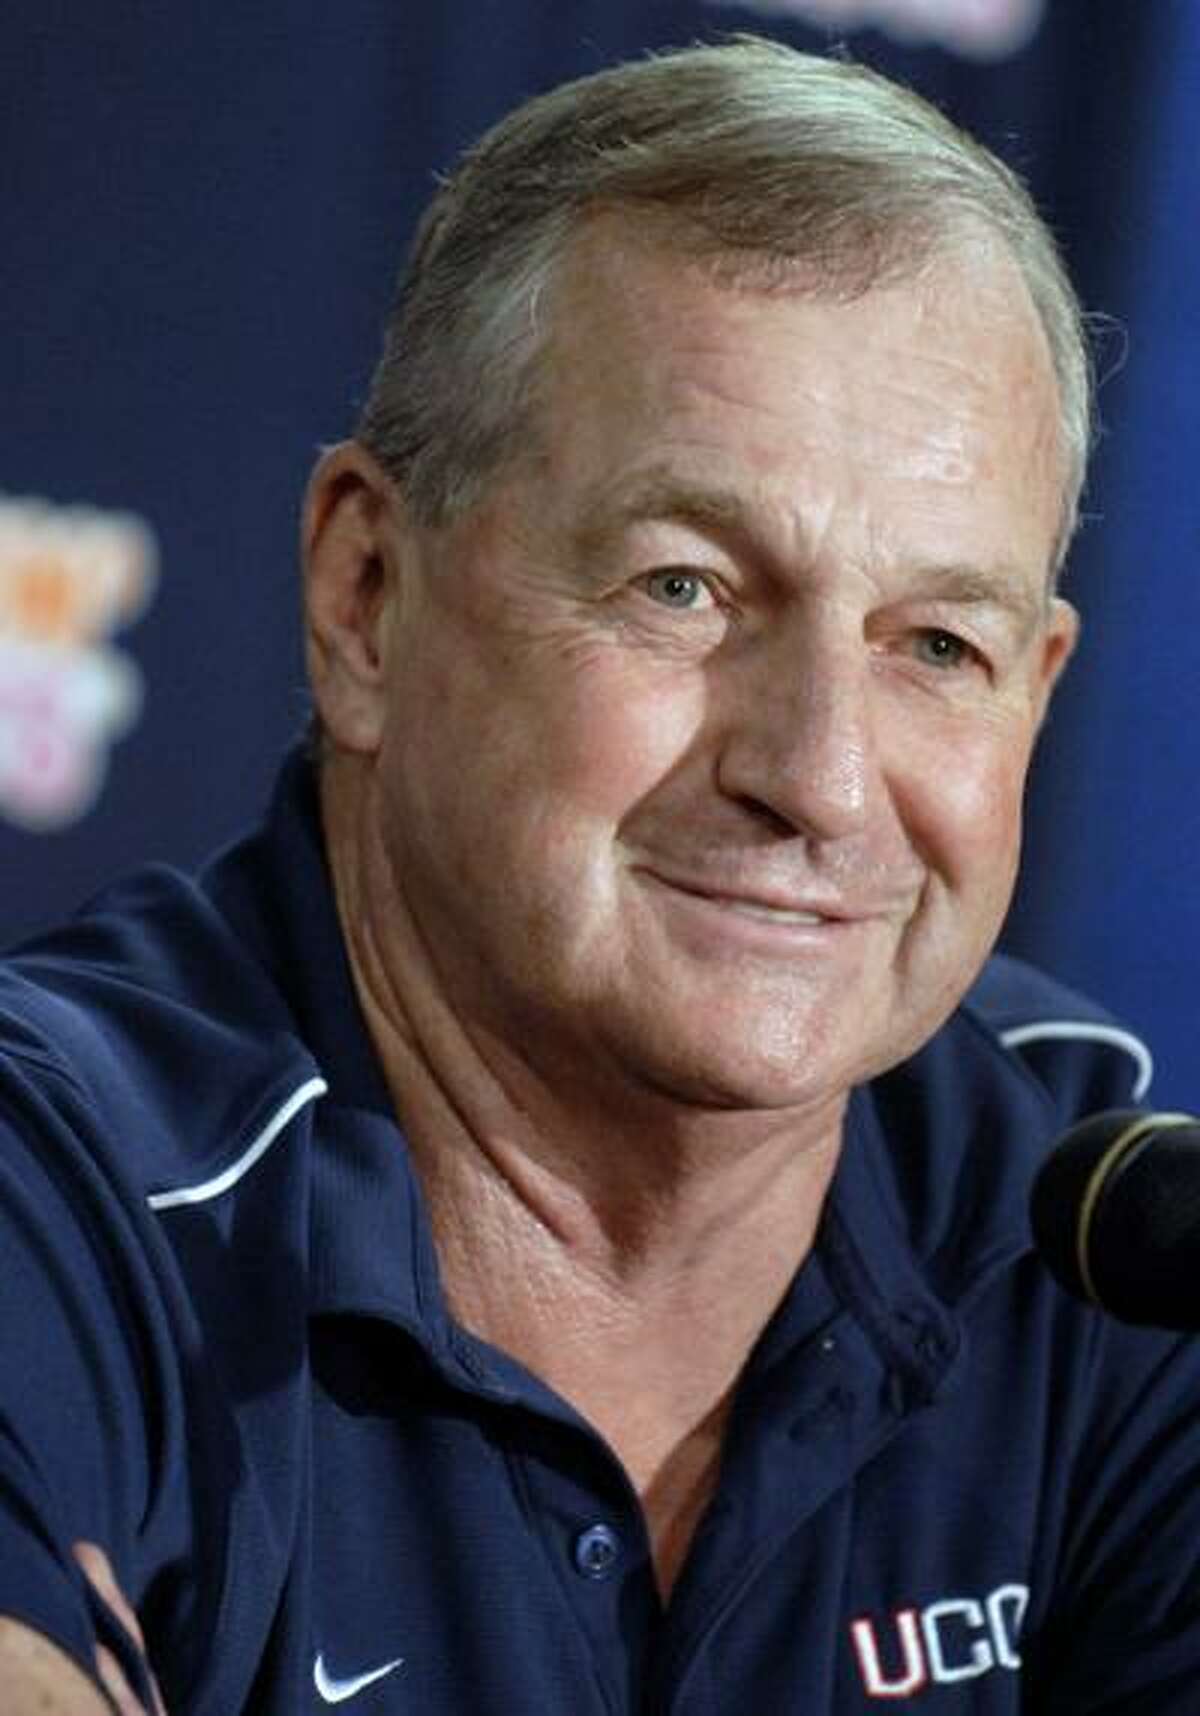 Jim Calhoun returned to his coaching duties Thursday, after a medical leave of more than three weeks forced him to miss seven games. (Associated Press)